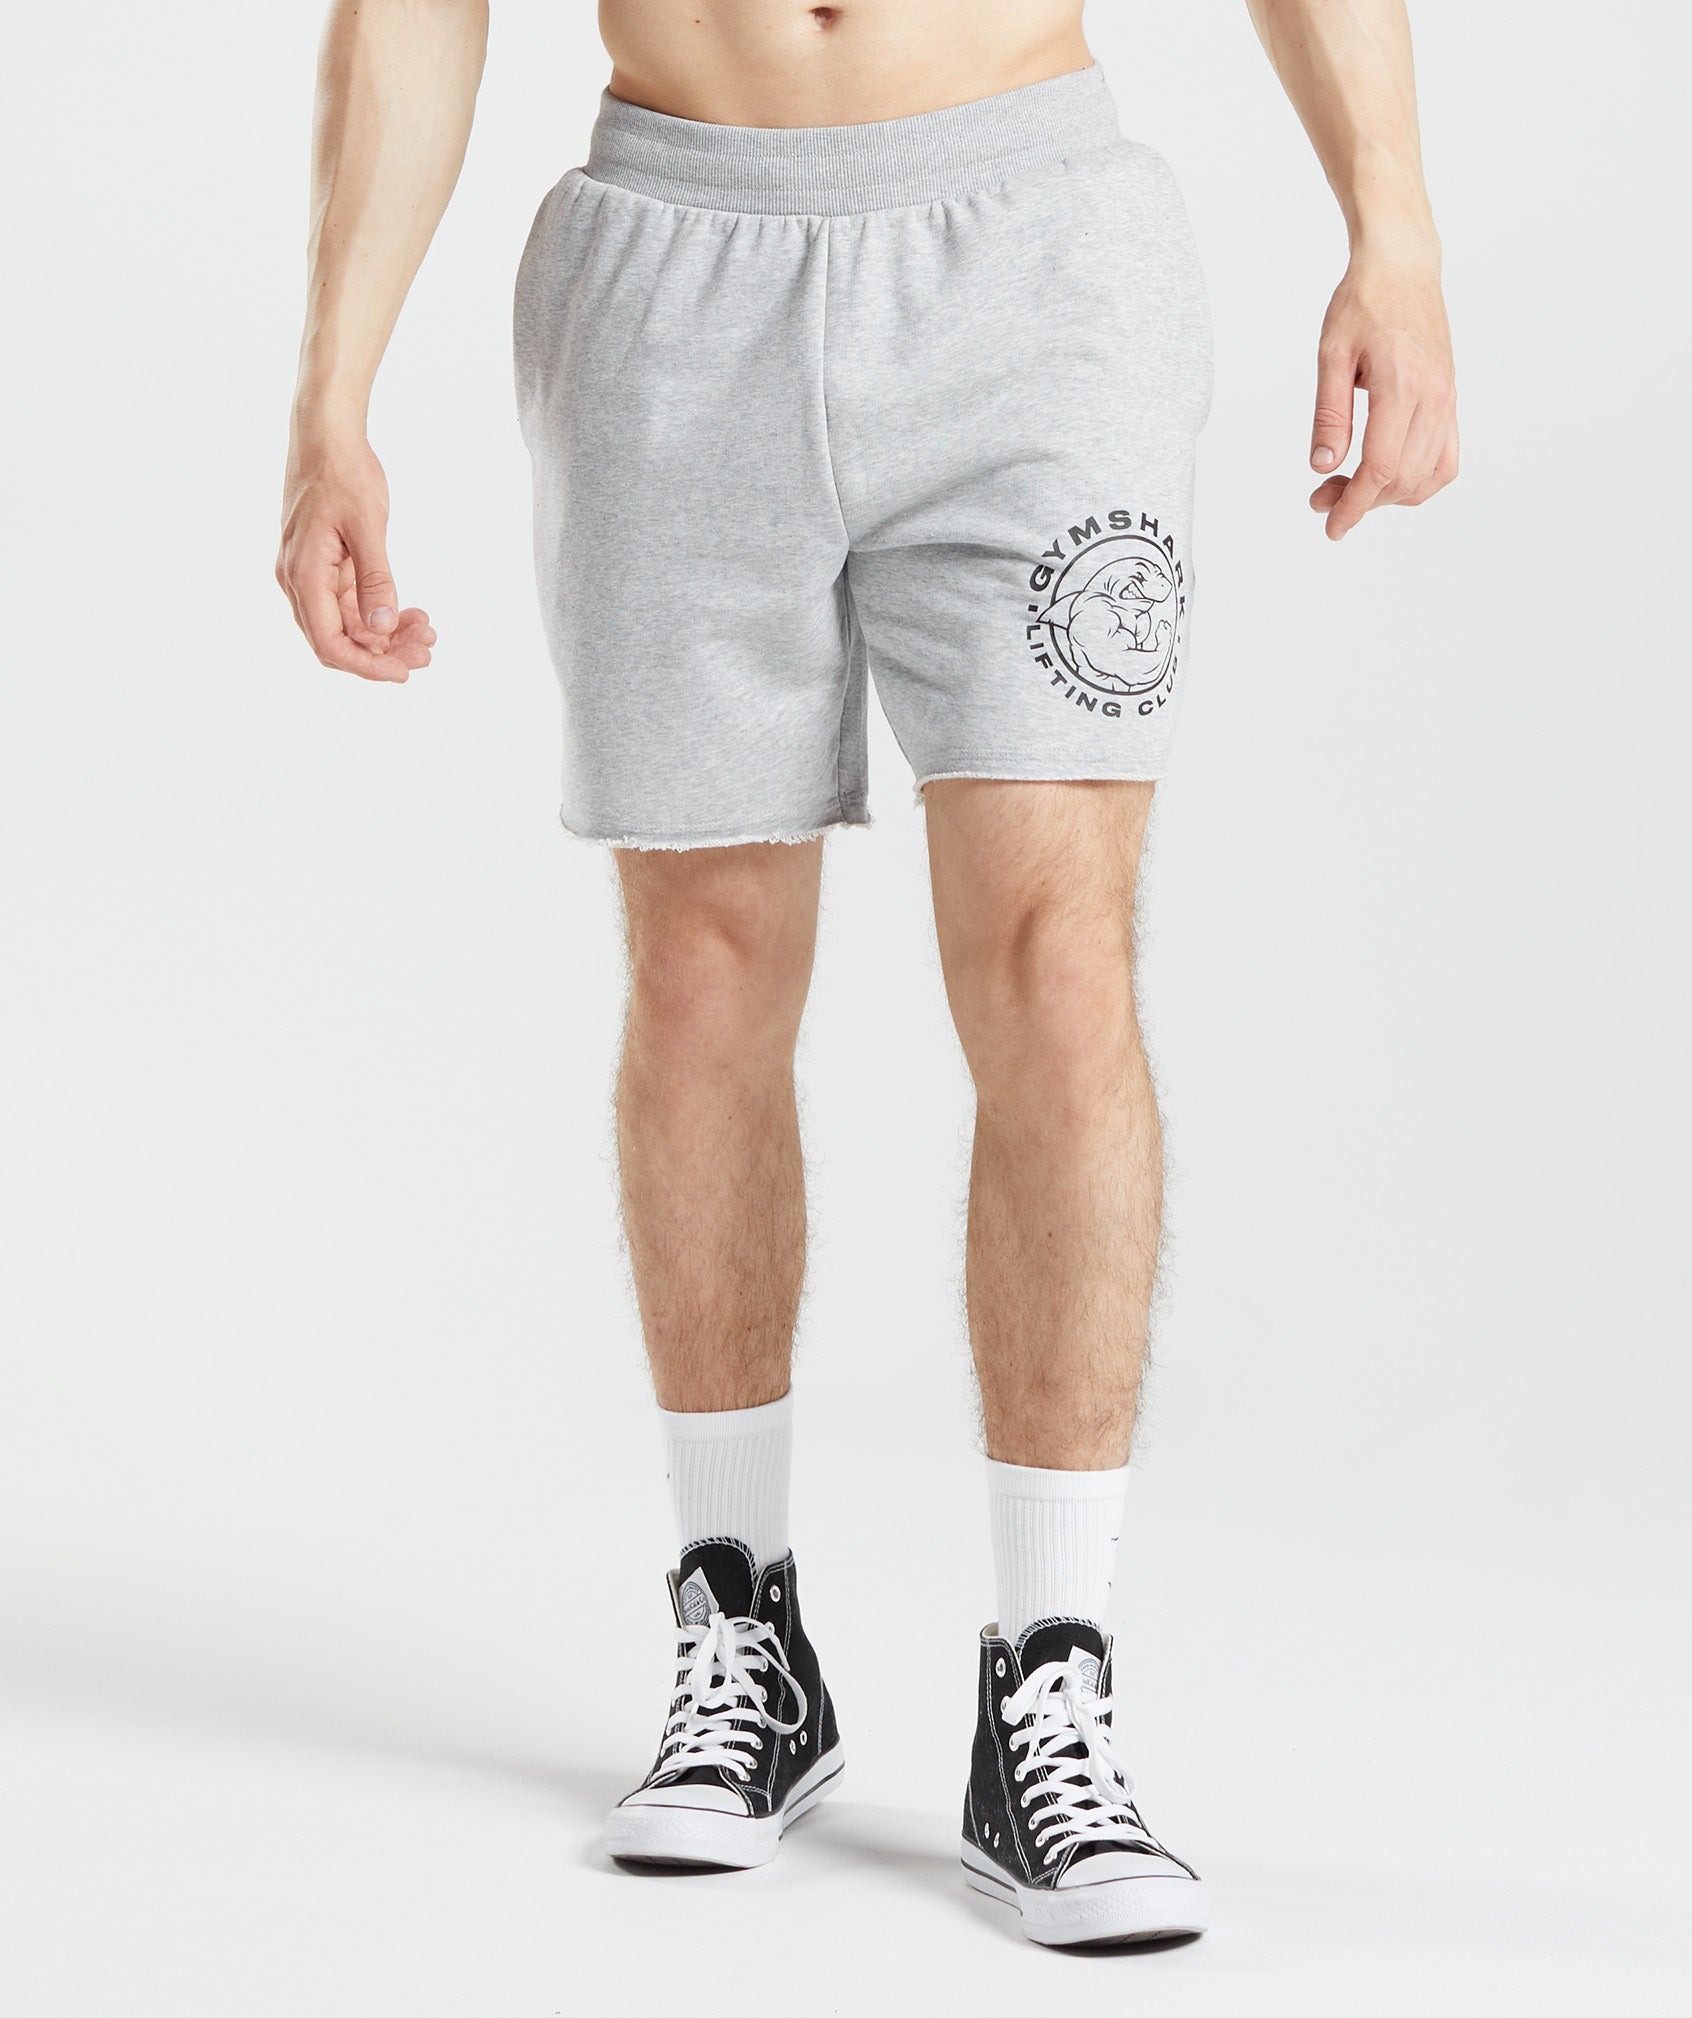 Legacy Shorts in Light Grey Core Marl